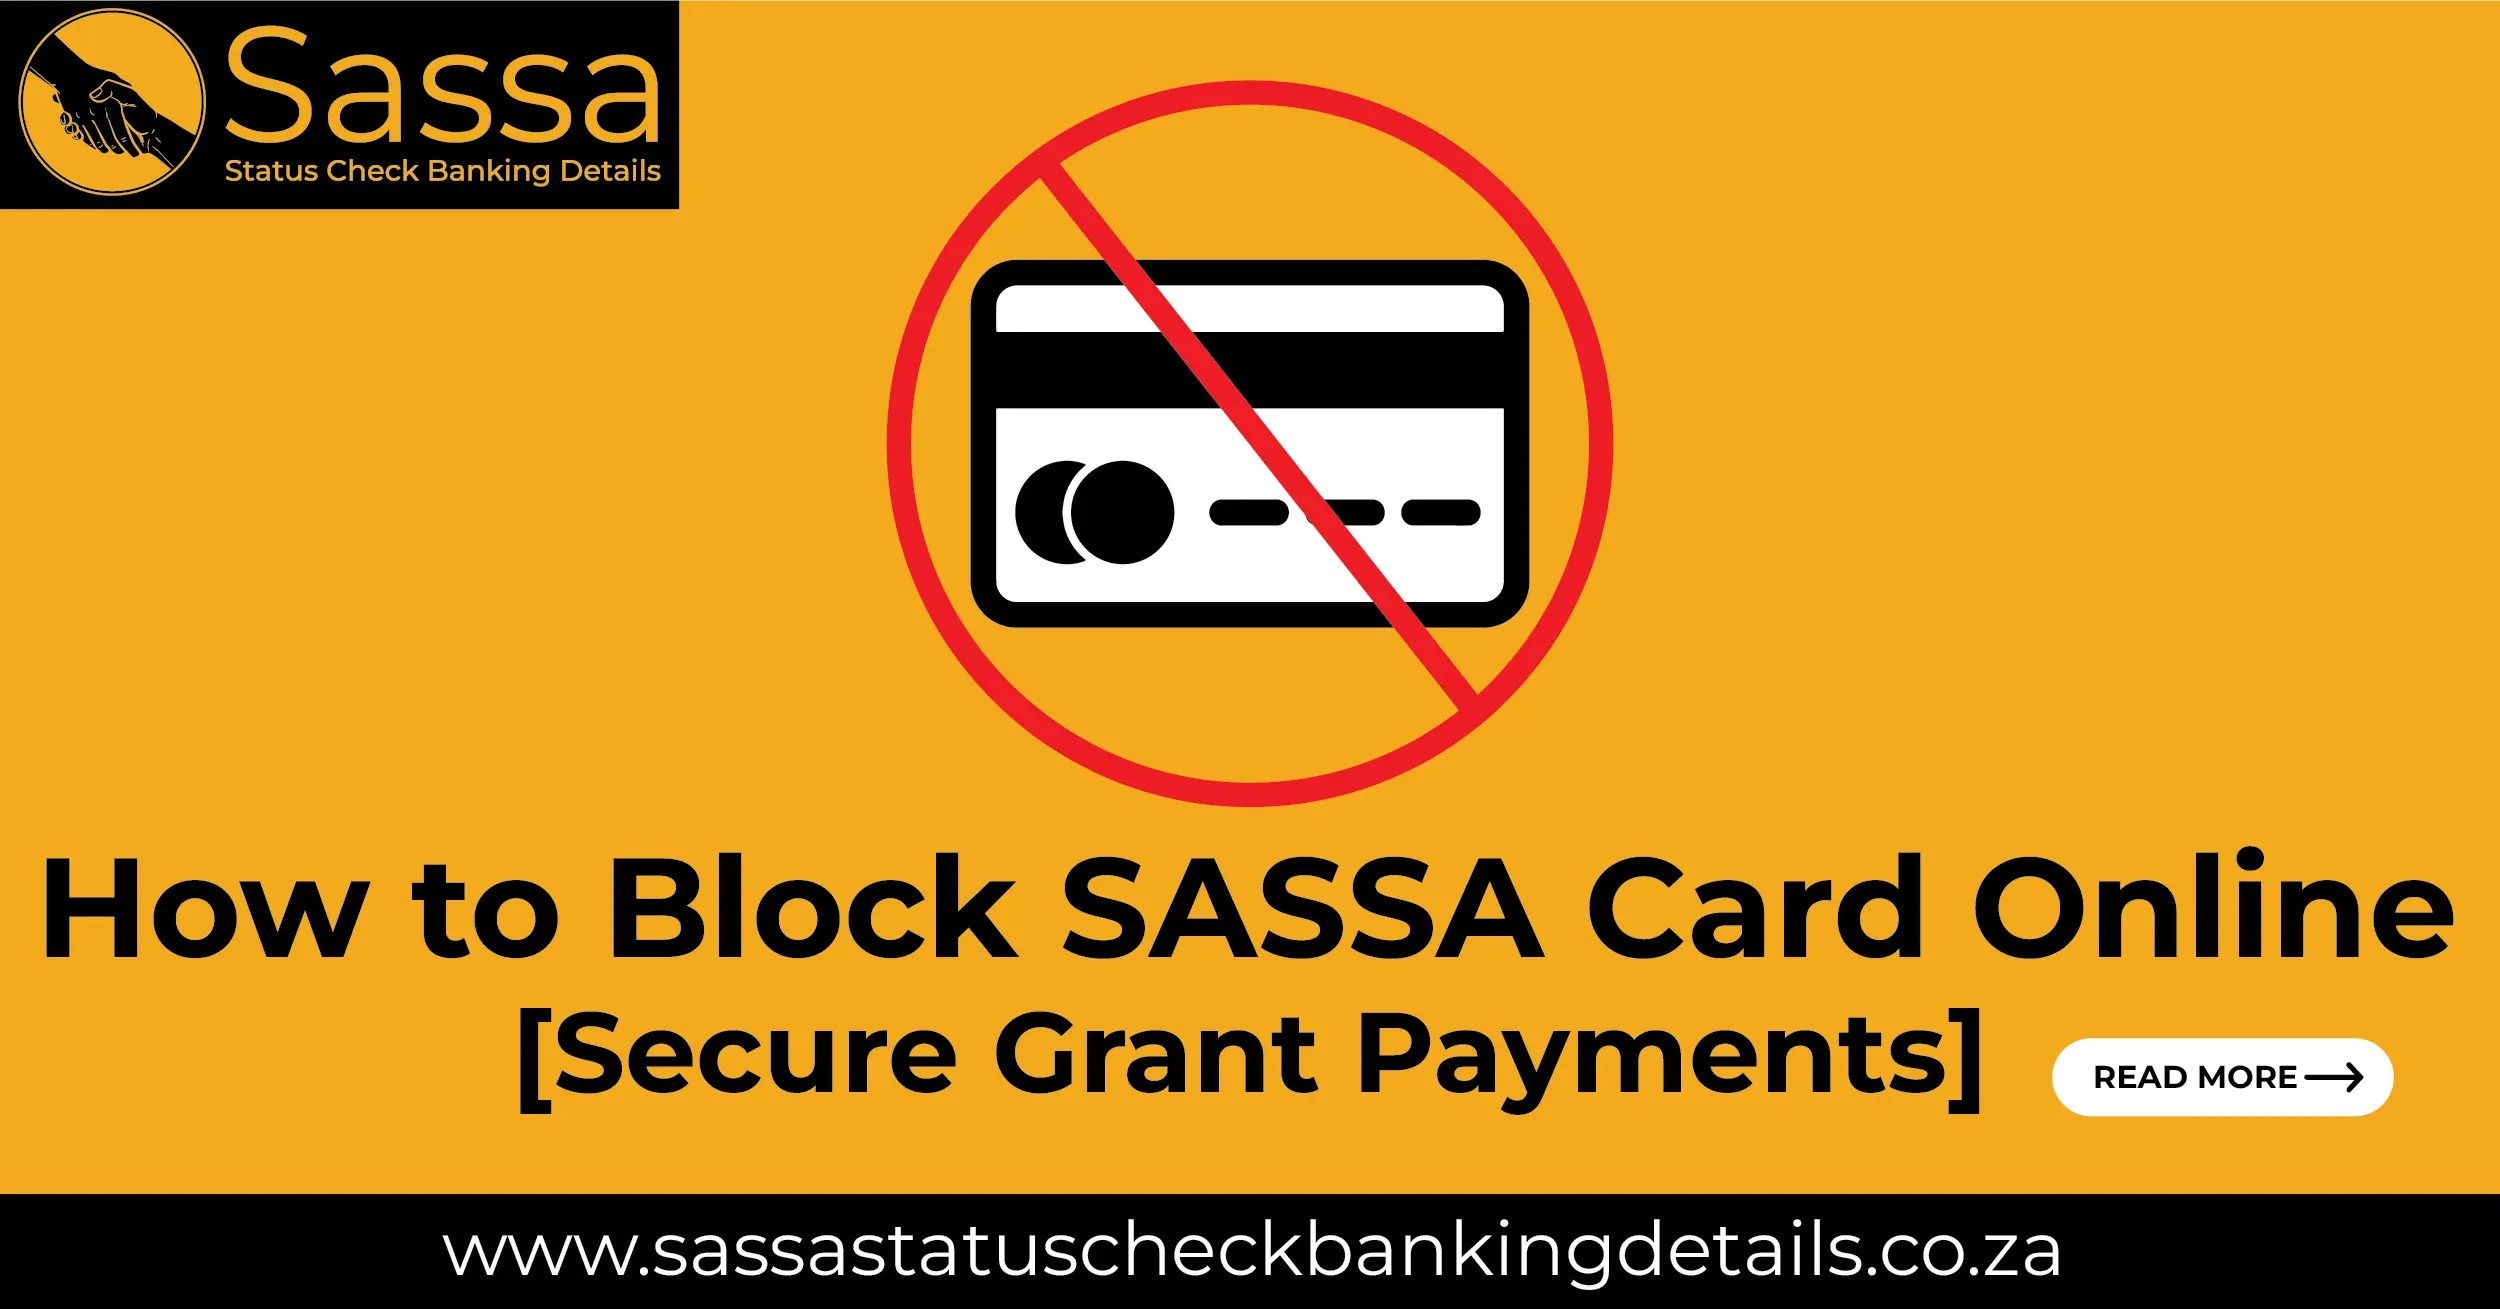 How to Block SASSA Card Online and Secure Grant Payments